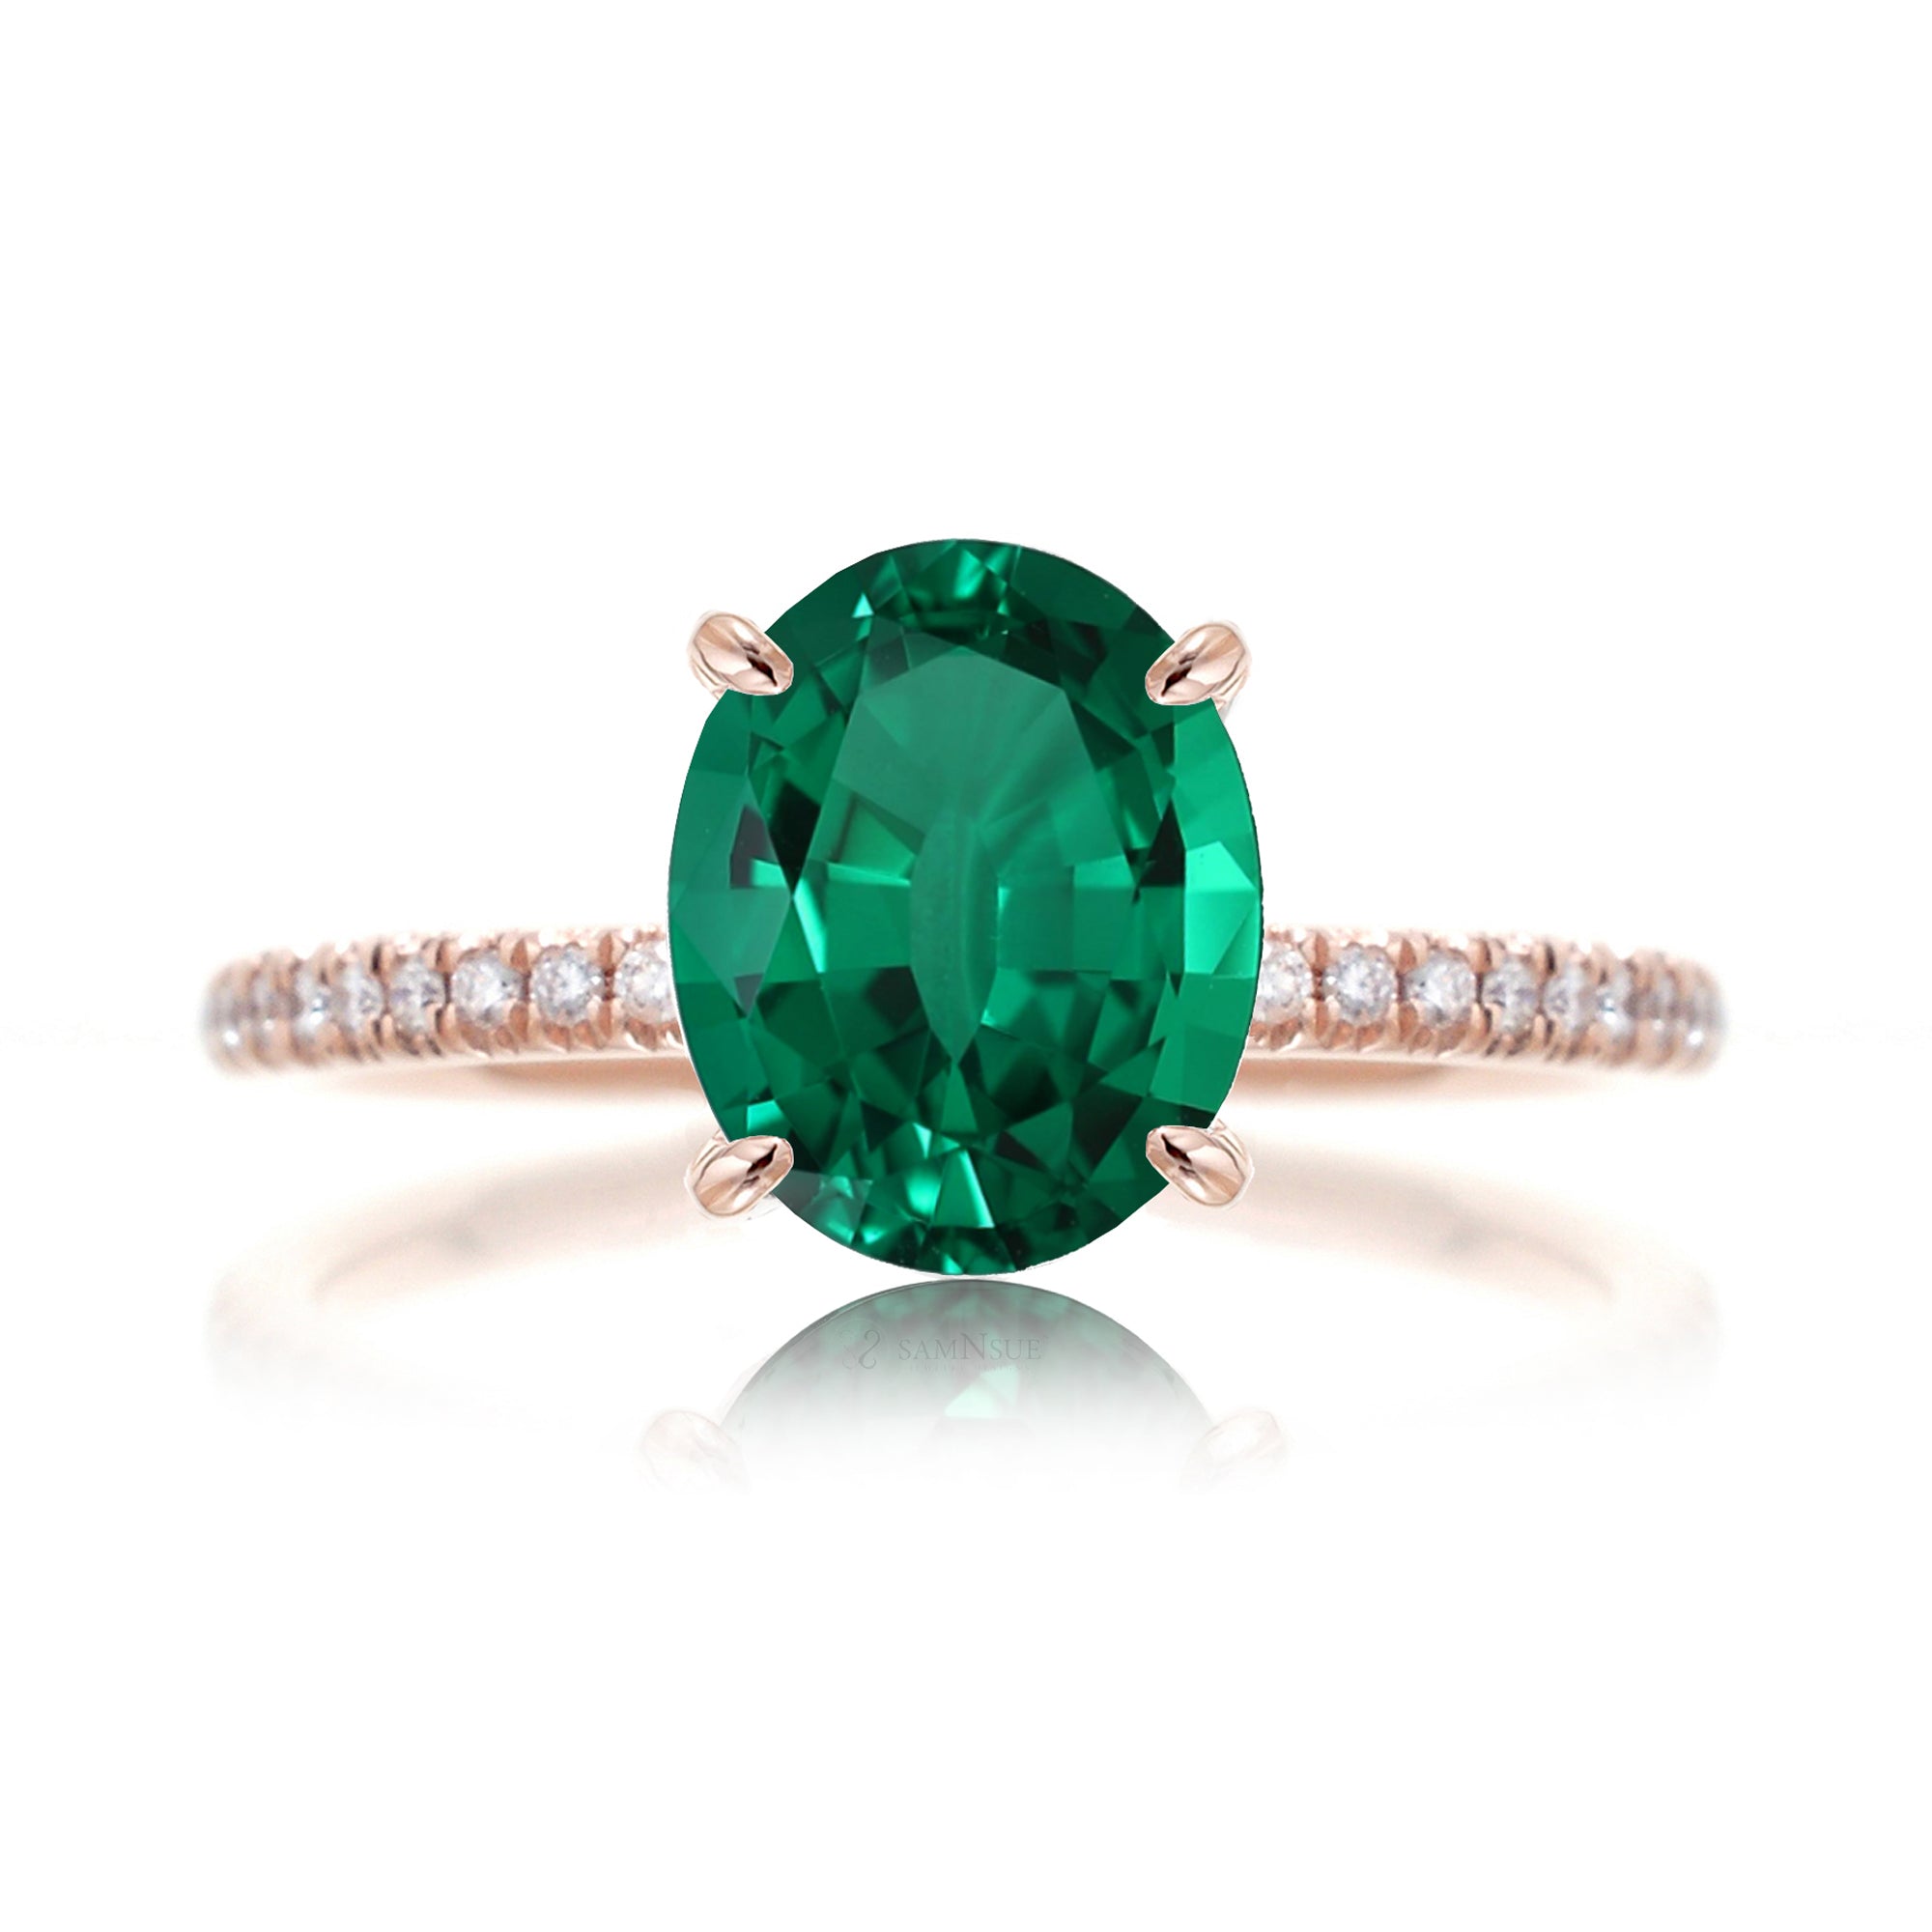 Oval green emerald diamond band engagement ring rose gold - the Ava